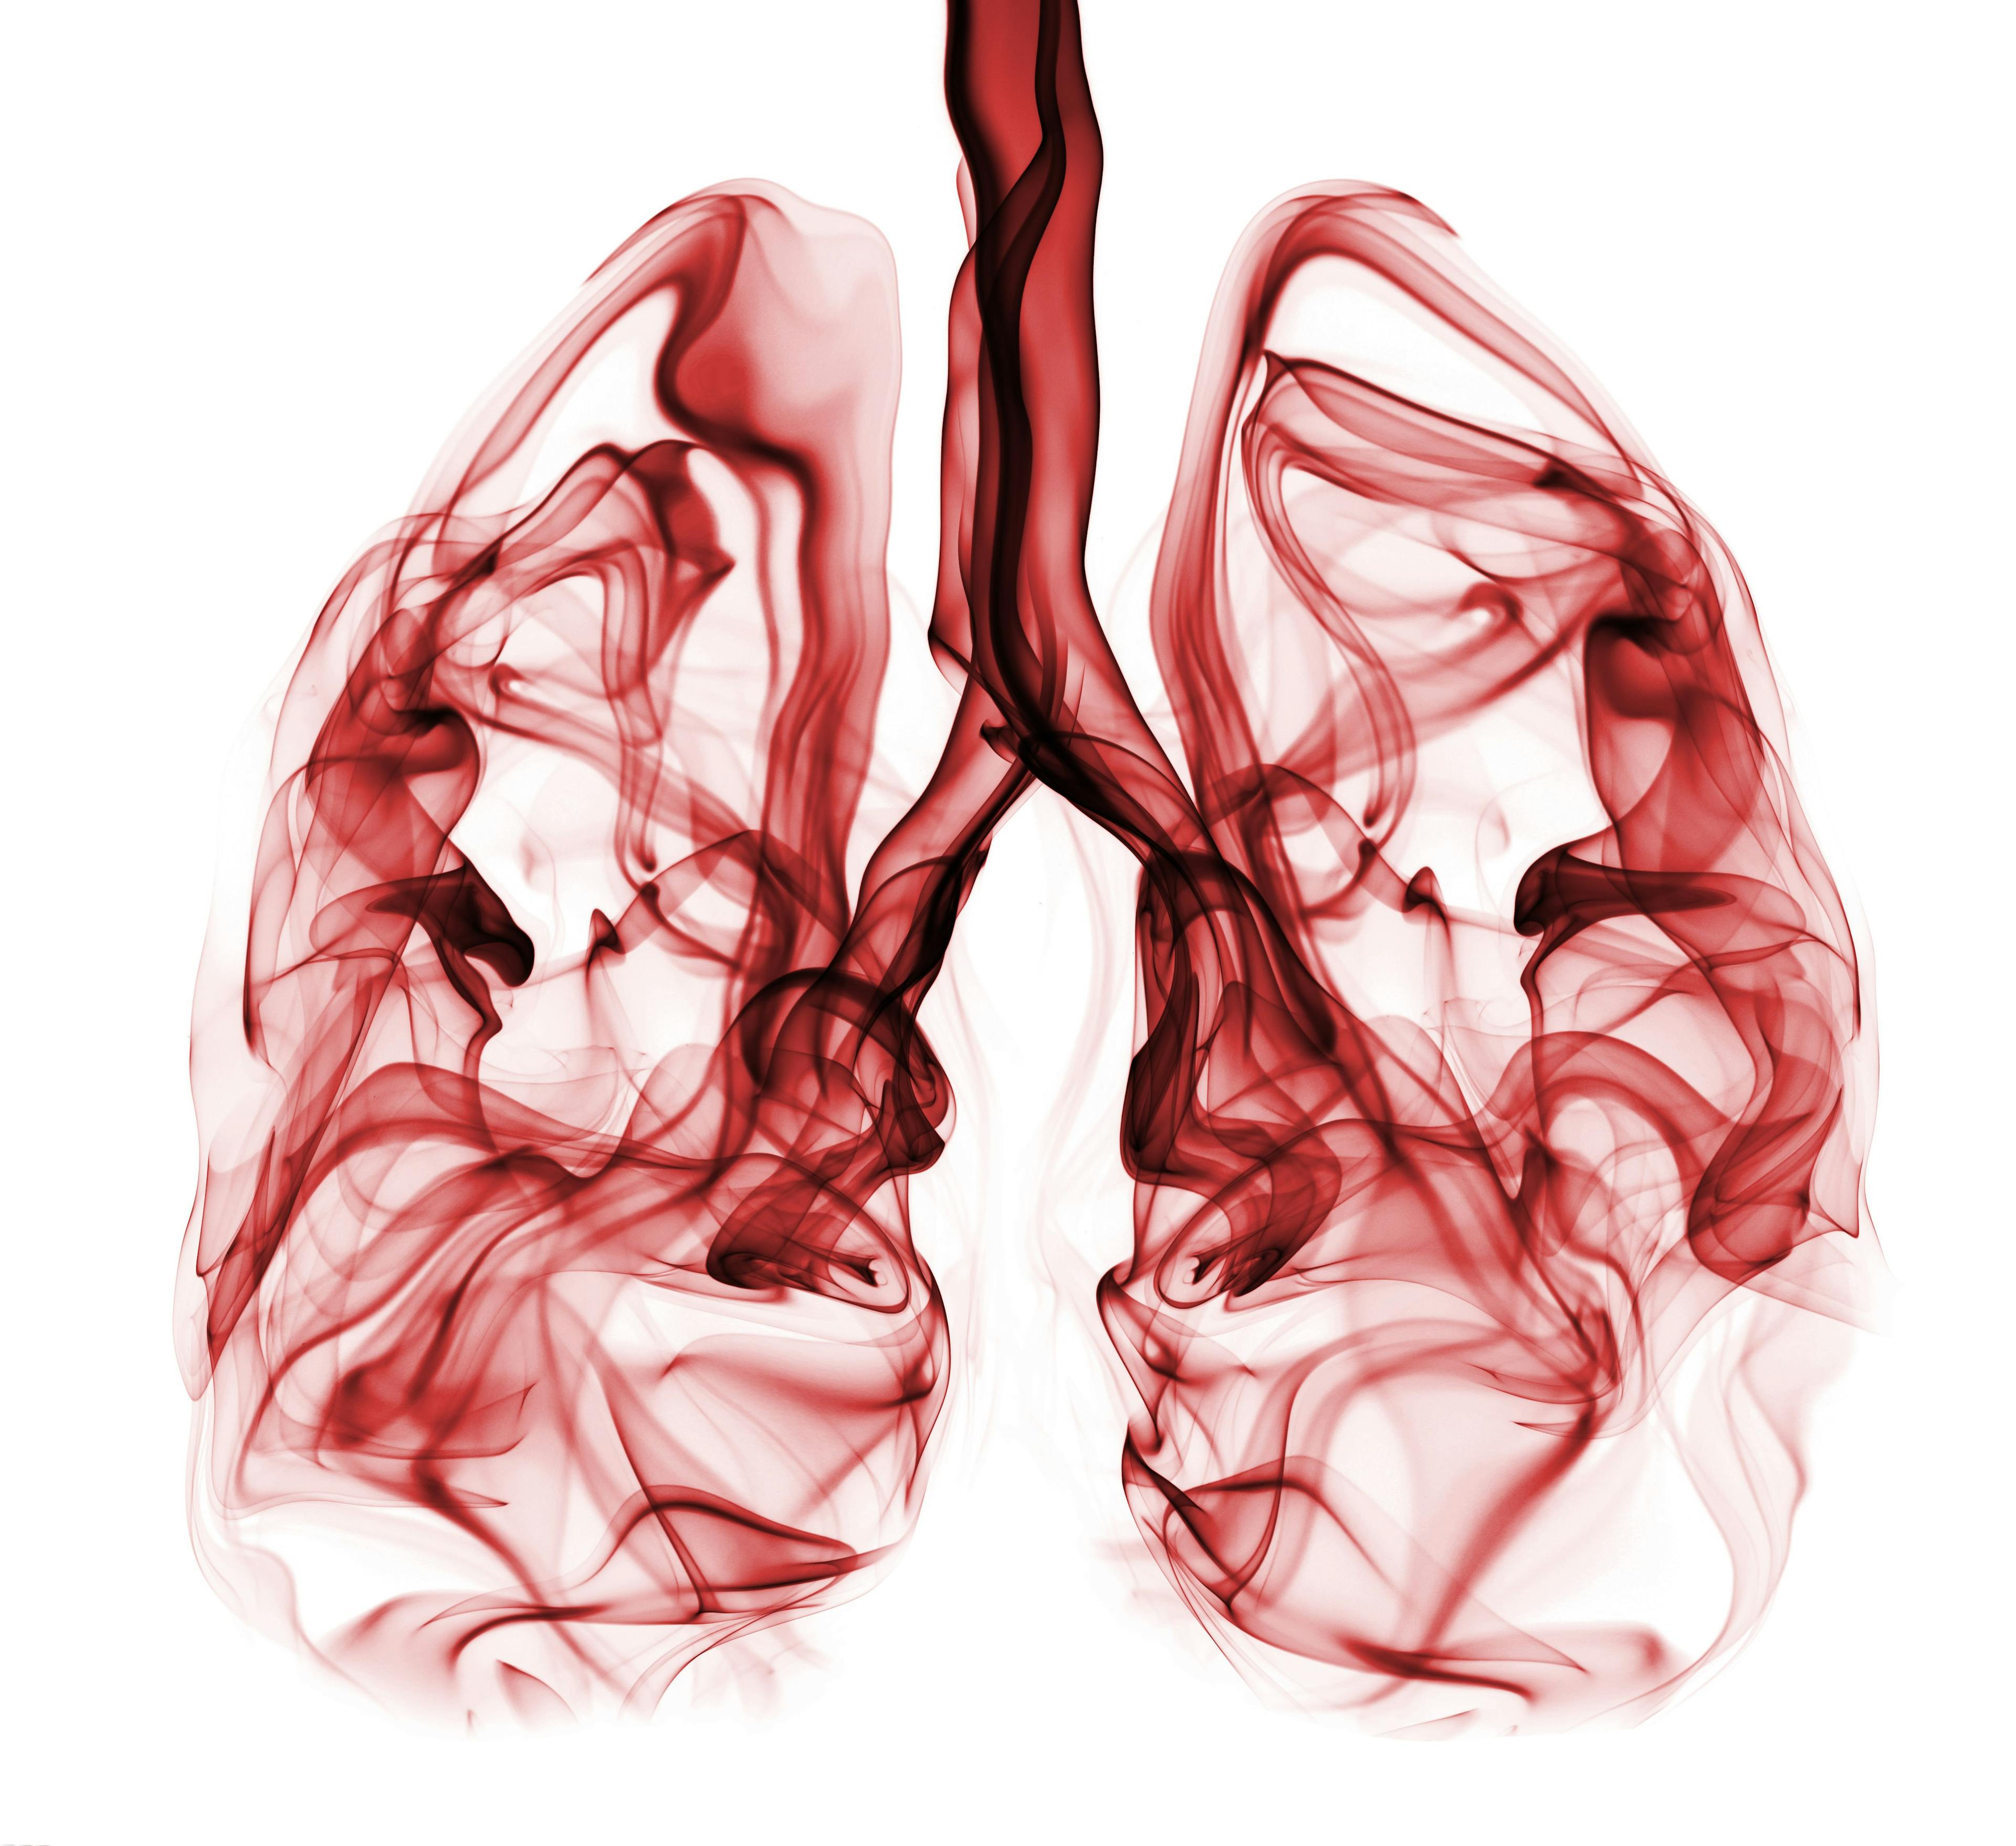 Experimental Treatment Shows Promise for Certain Cases of Advanced NSCLC